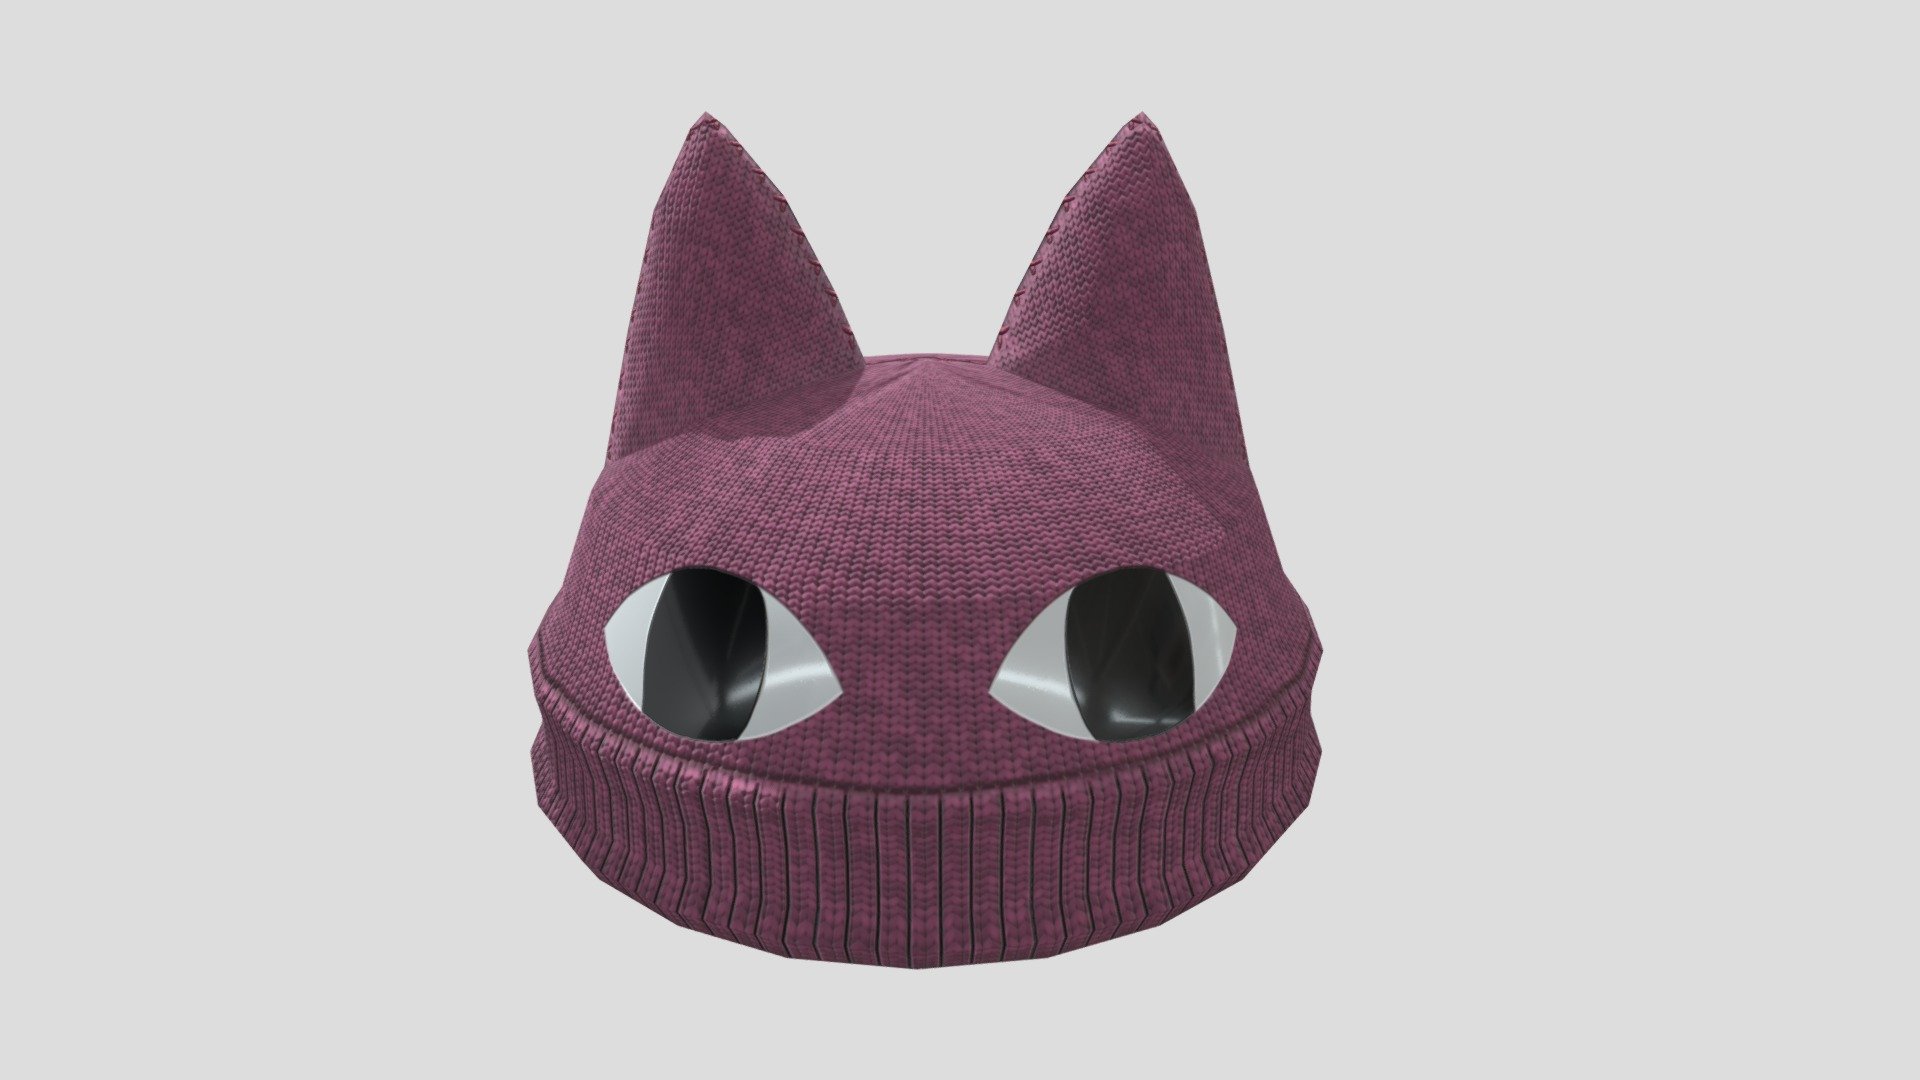 A feline-themed hat that will be sure to keep your brainpan warm during the coming winter months. The ears flop around and the eyes piercing gaze instill fear in your enemies 3d model